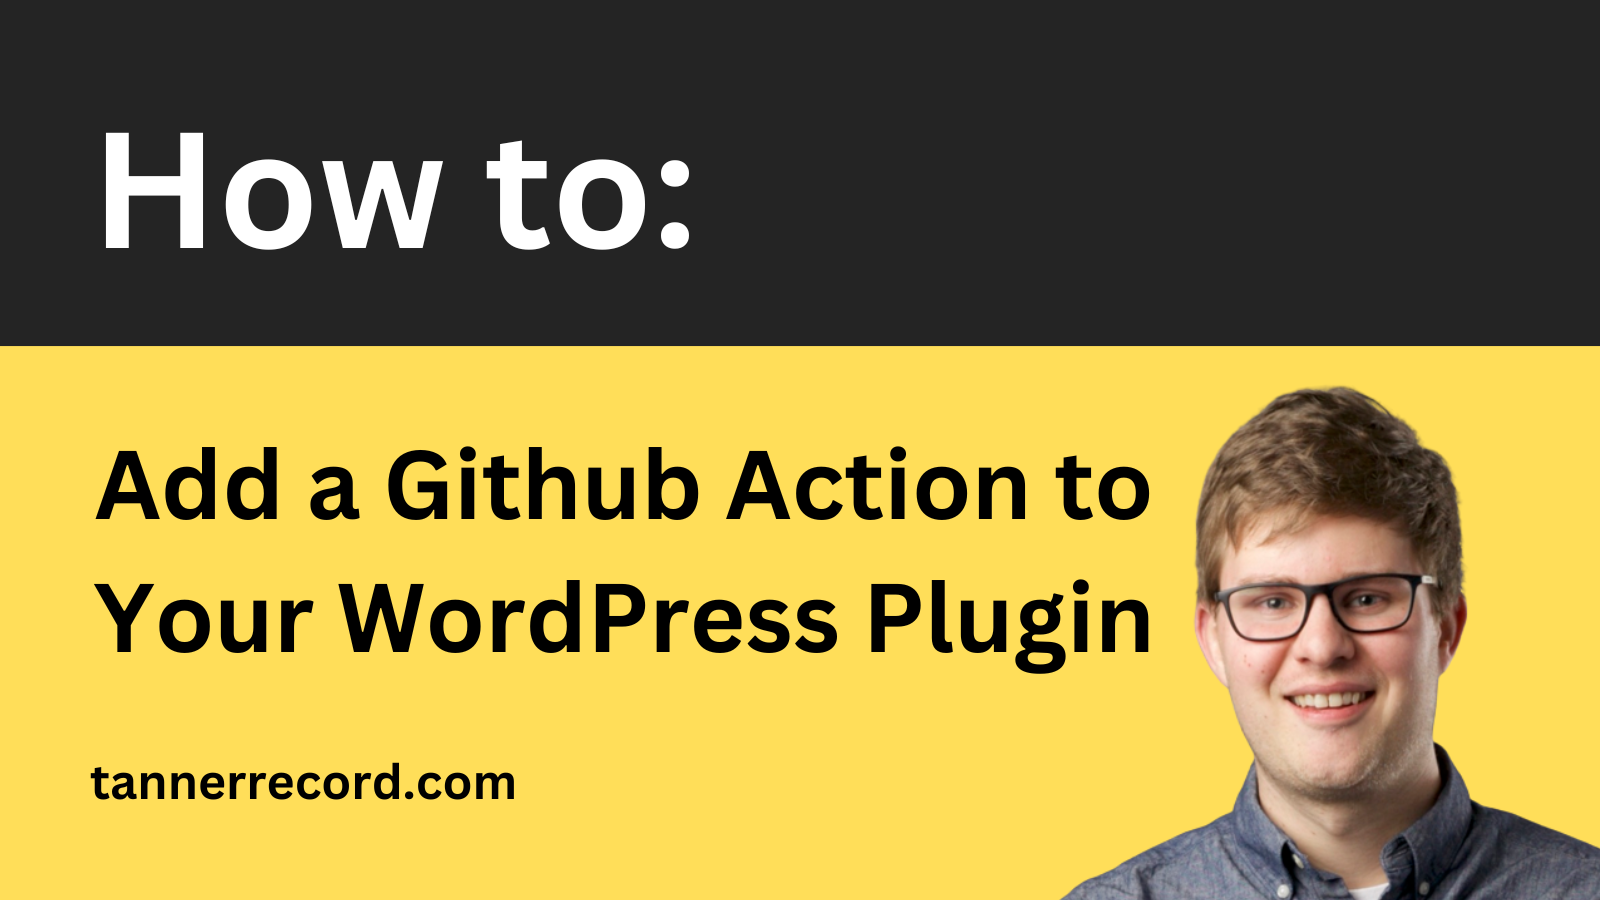 SWPD#001: How to add a Github Action to your WordPress plugin